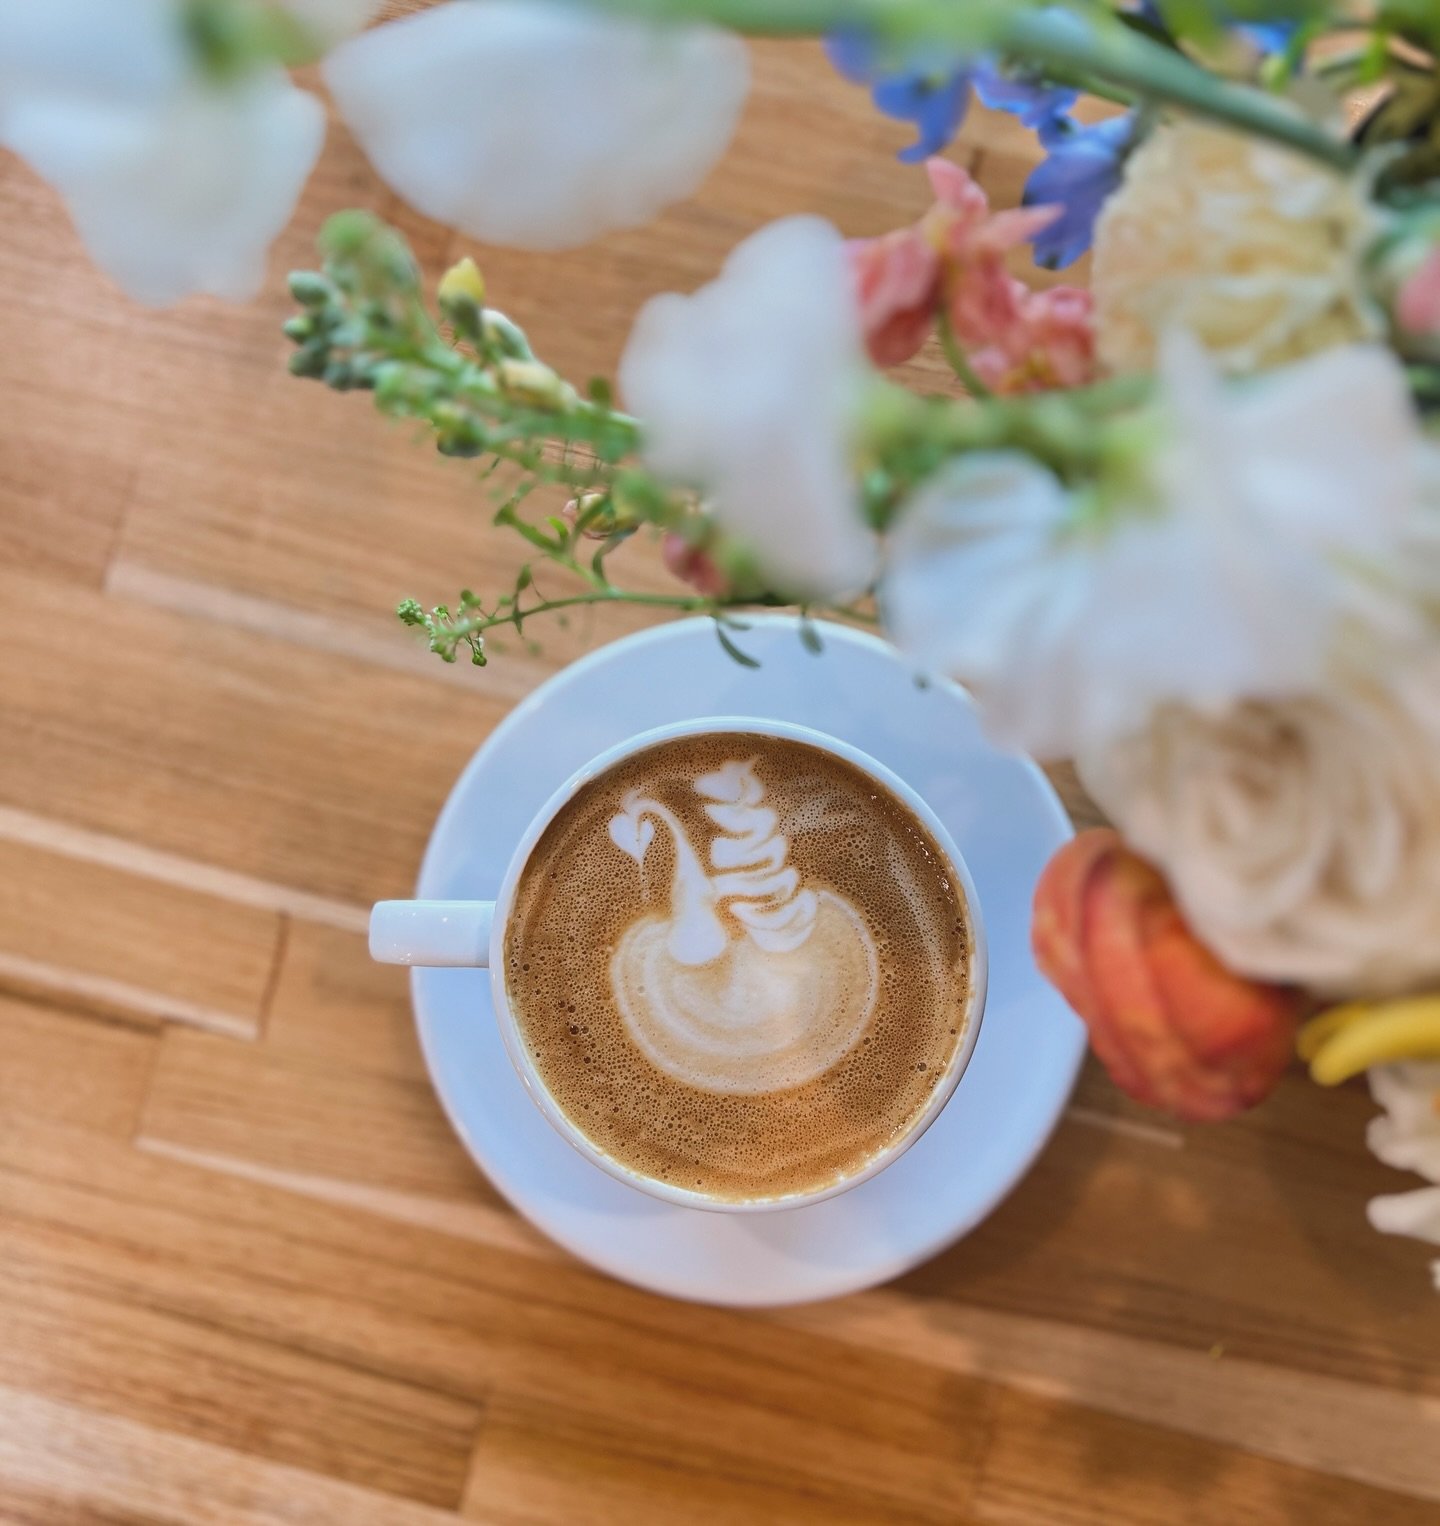 A cup of cozy 🦢 🌸  We&rsquo;d love to serve you one soon. Open tomorrow from 7-2! 

#levity #coffeelovers #espresso #latteart #latte #normanok #okc #okceats #normaneats #breakfast #breakfasthouse #breakfastlovers #brunch